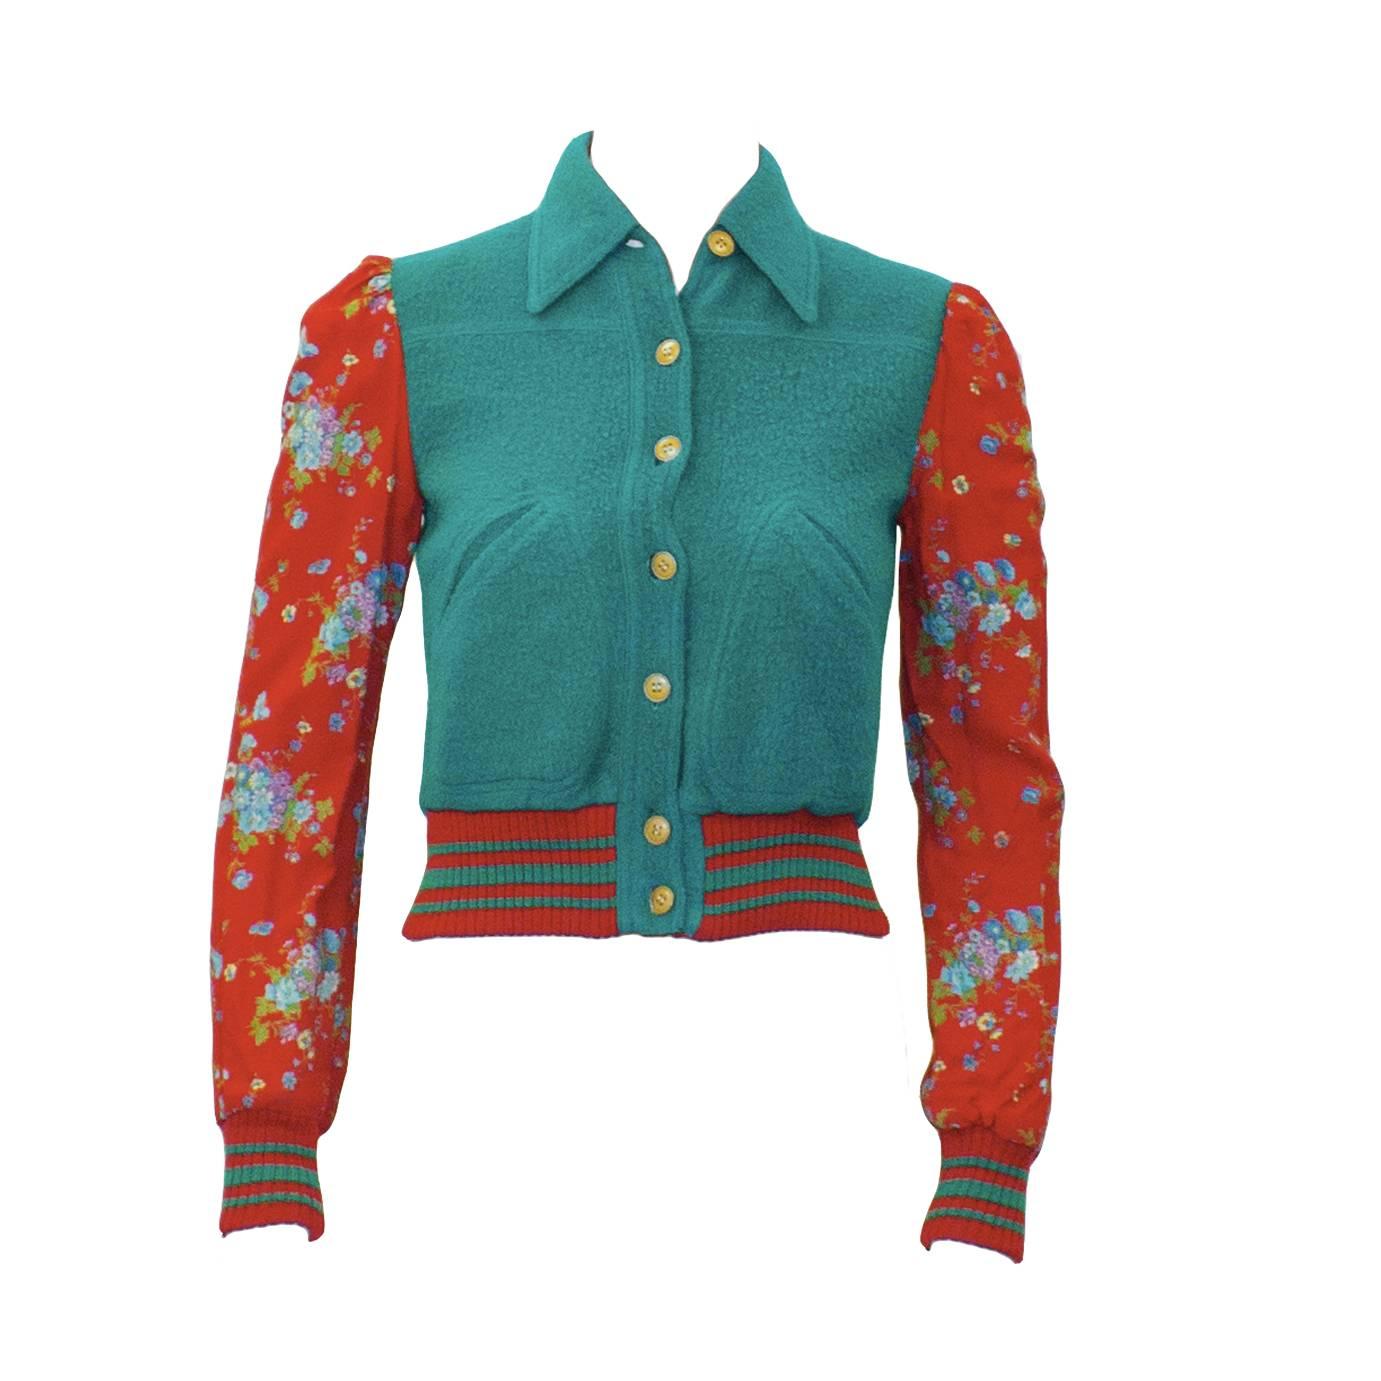 1971 Cacharel Green and Red Reversible Jacket 